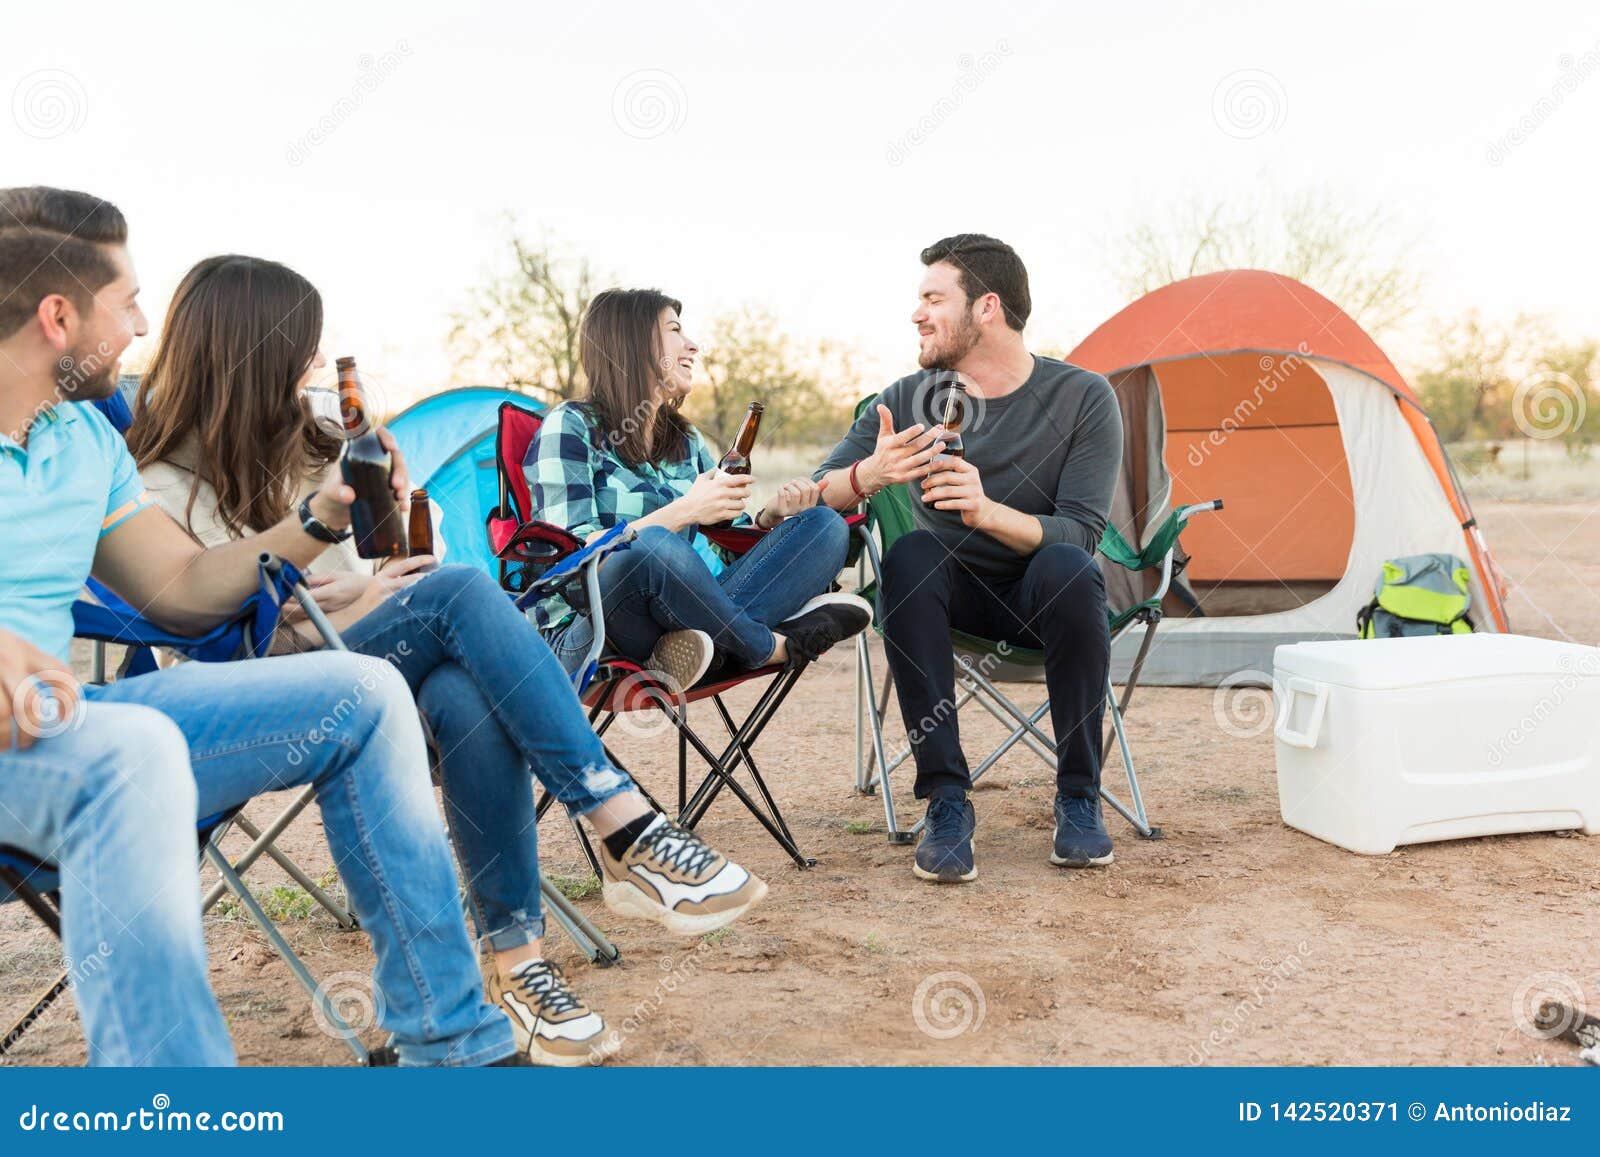 Sharing Funny Moments with Friends while Camping Stock Image - Image of ...